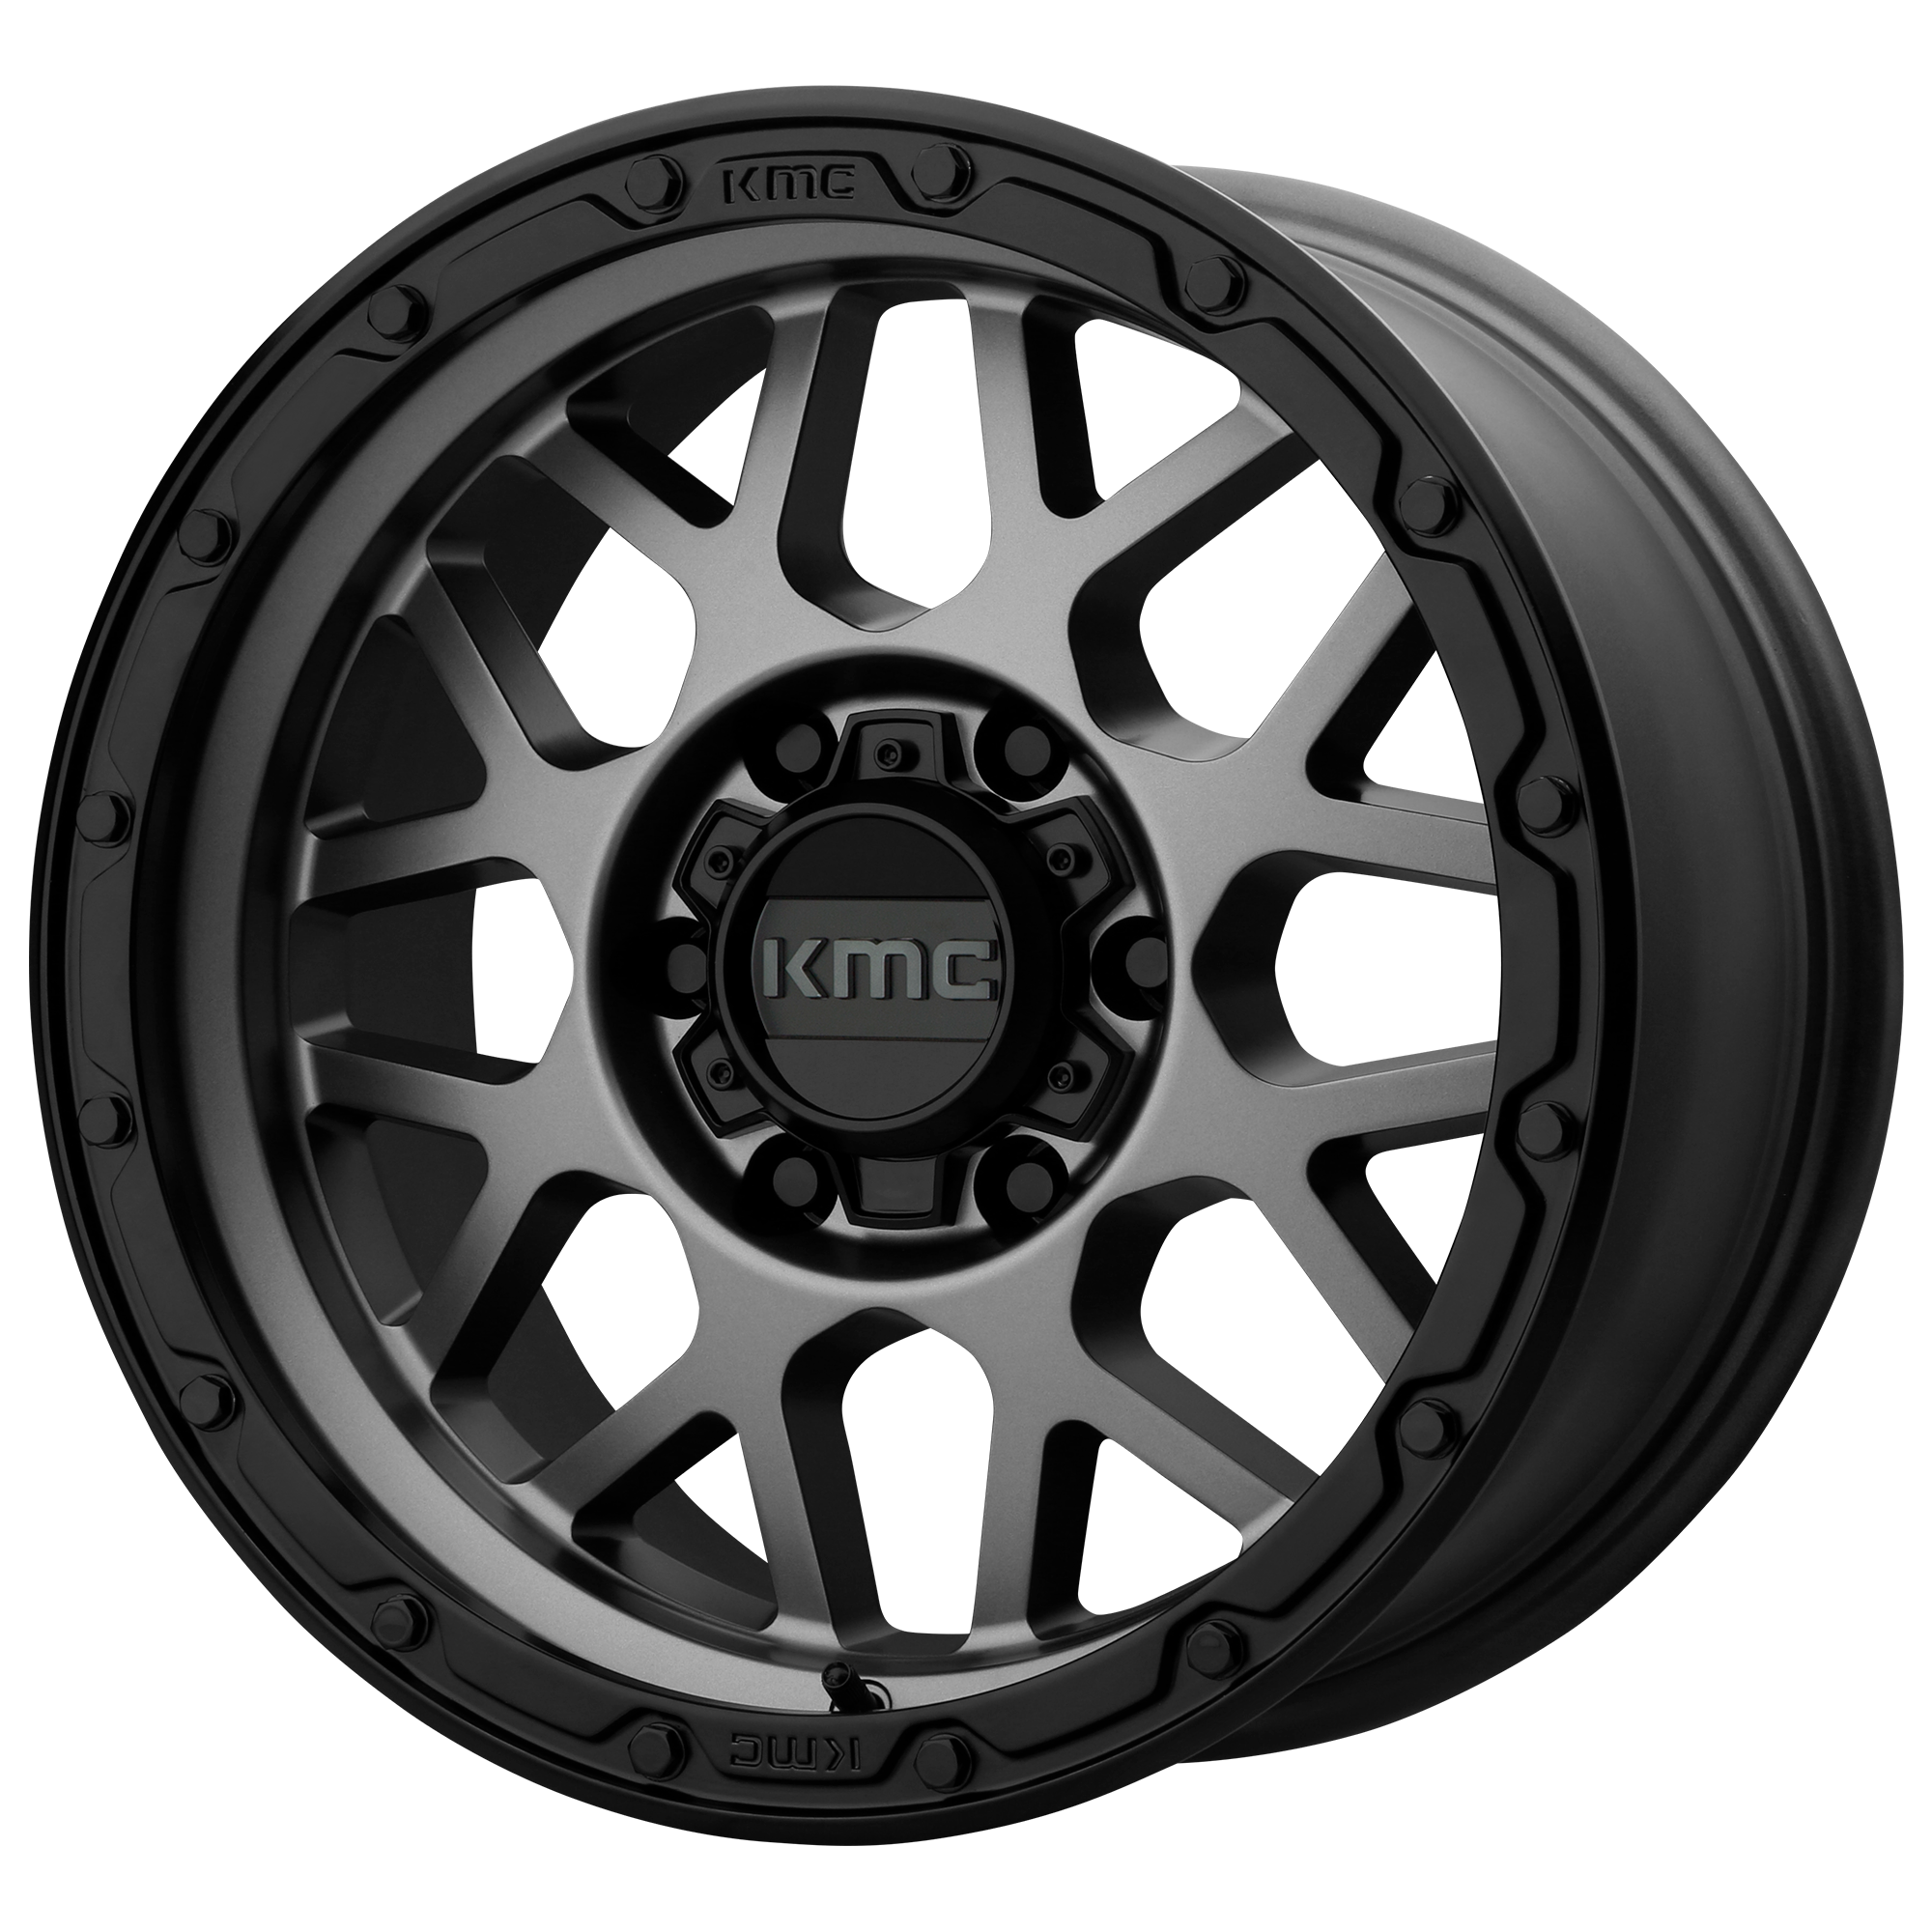 GRENADE OFF-ROAD 17x9 6x135.00 MATTE GRAY W/ MATTE BLACK LIP (-12 mm) - Tires and Engine Performance